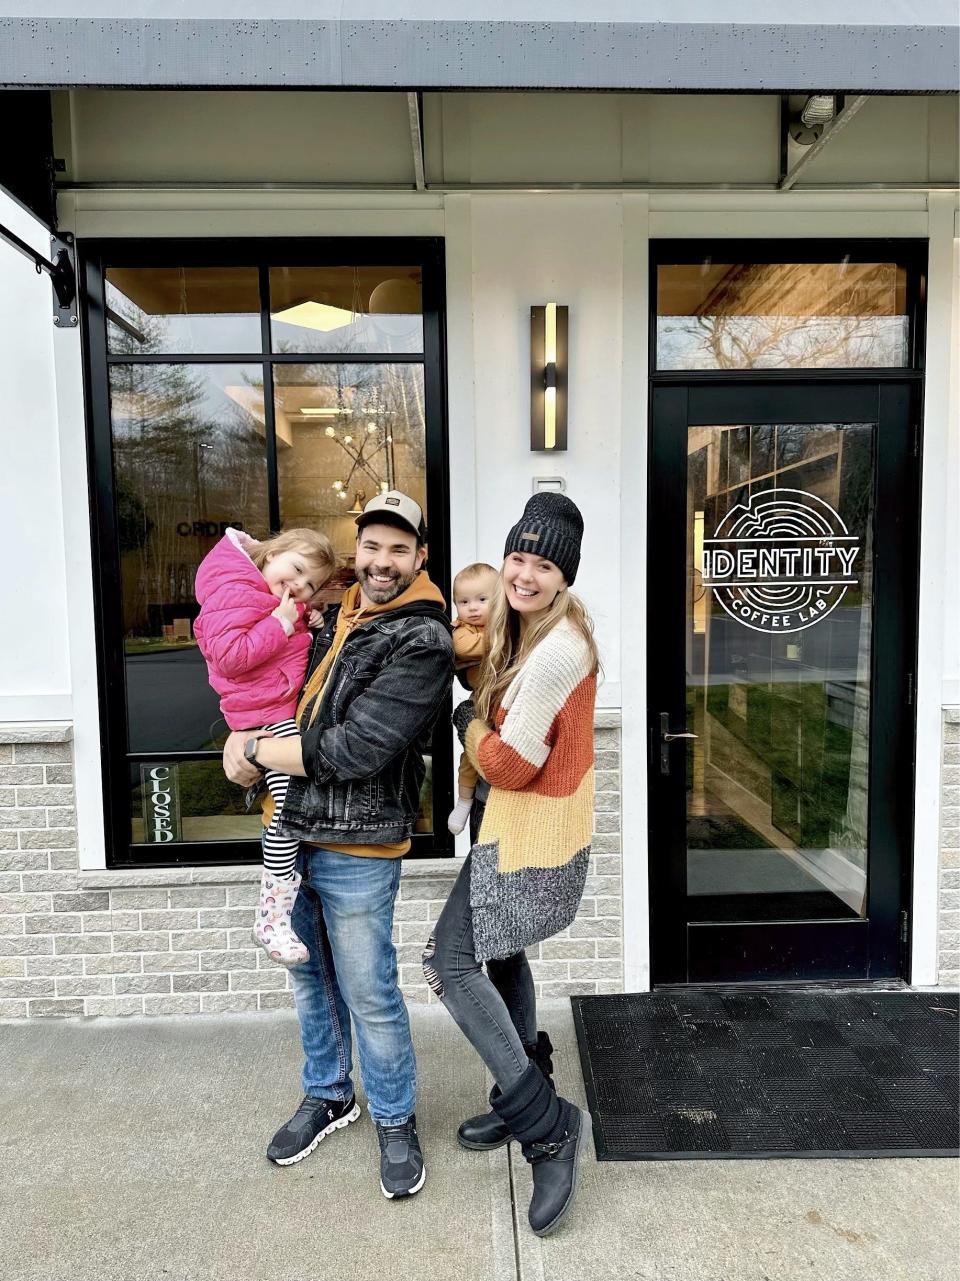 In October 2022, Jonathan and Britney Cashman became the new owners of Identity Coffee Lab and they have big plans to expand the brand all over New England.